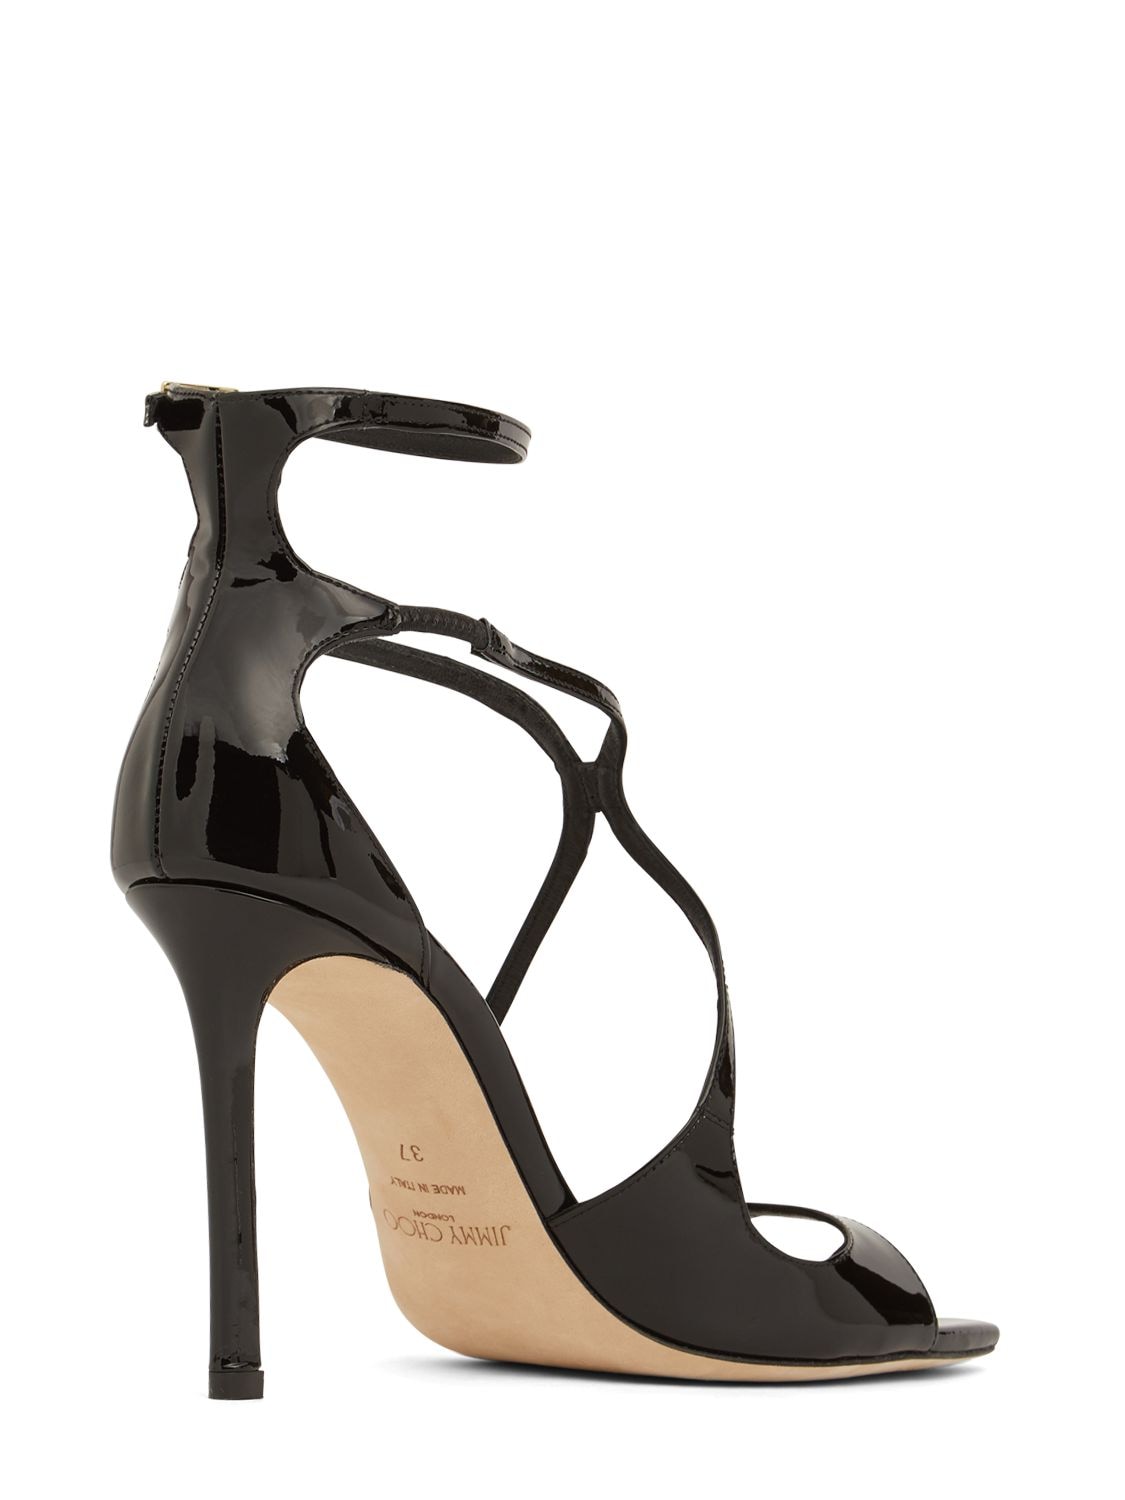 Shop Jimmy Choo 95mm Azia Patent Leather Sandals In Black